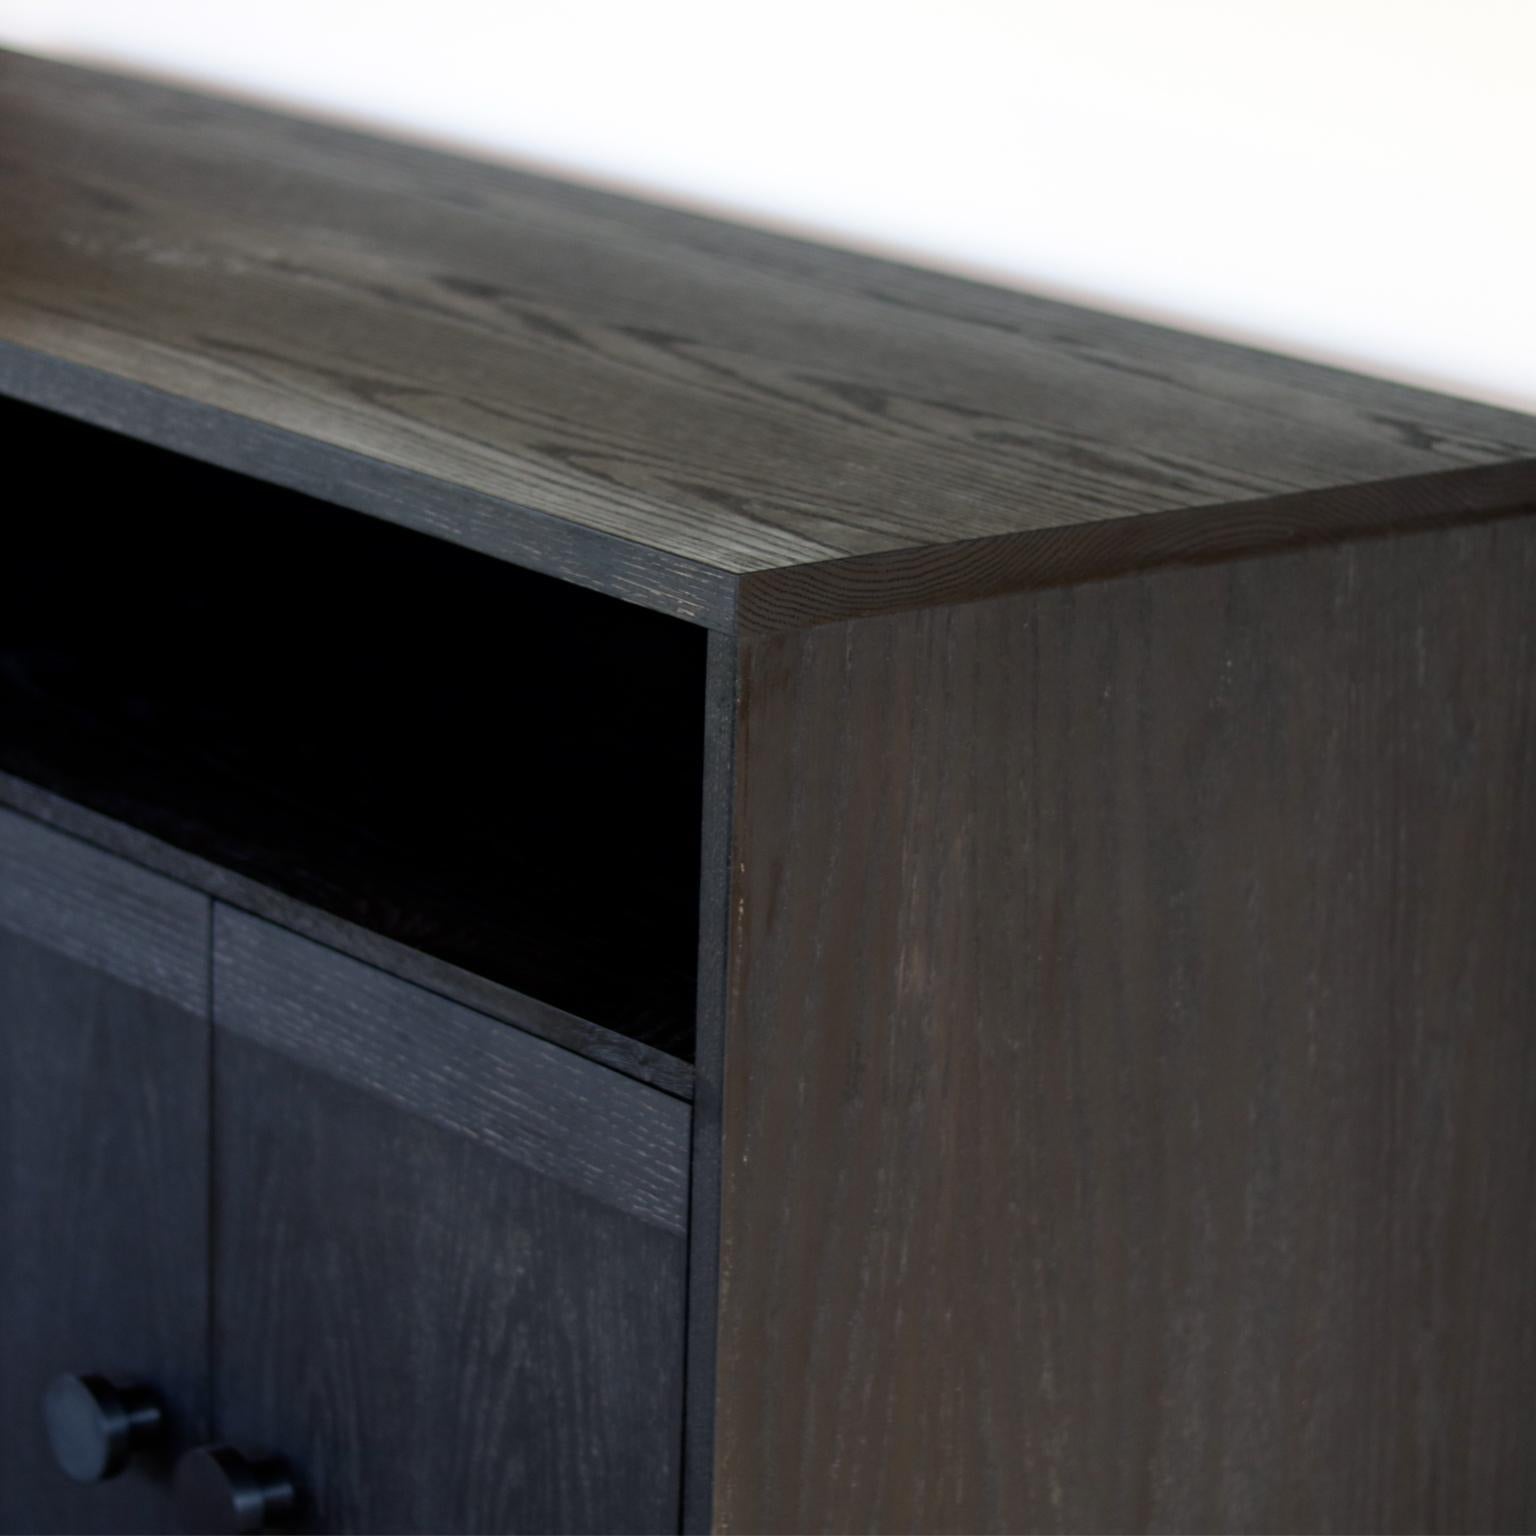 Featuring solid oak construction, aluminum powder coated black knobs, and steel legs.

The Beauvoir cabinet is completely customizable.  